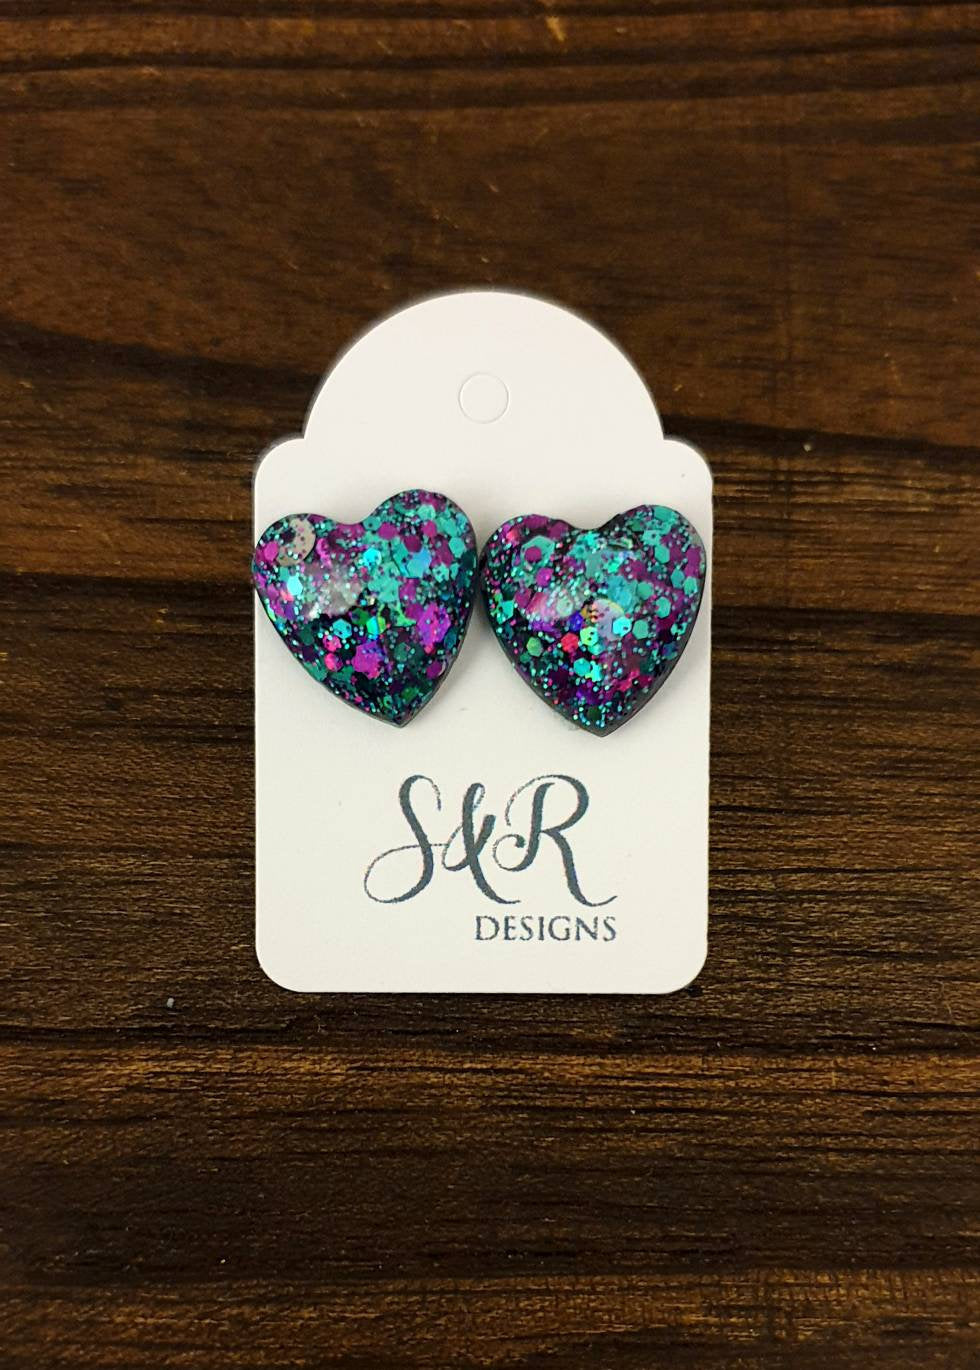 Faceted Heart Resin Stud Earrings, Sparkly Silver Purple Teal Mix Glitter, Stainless Steel 14mm Hearts